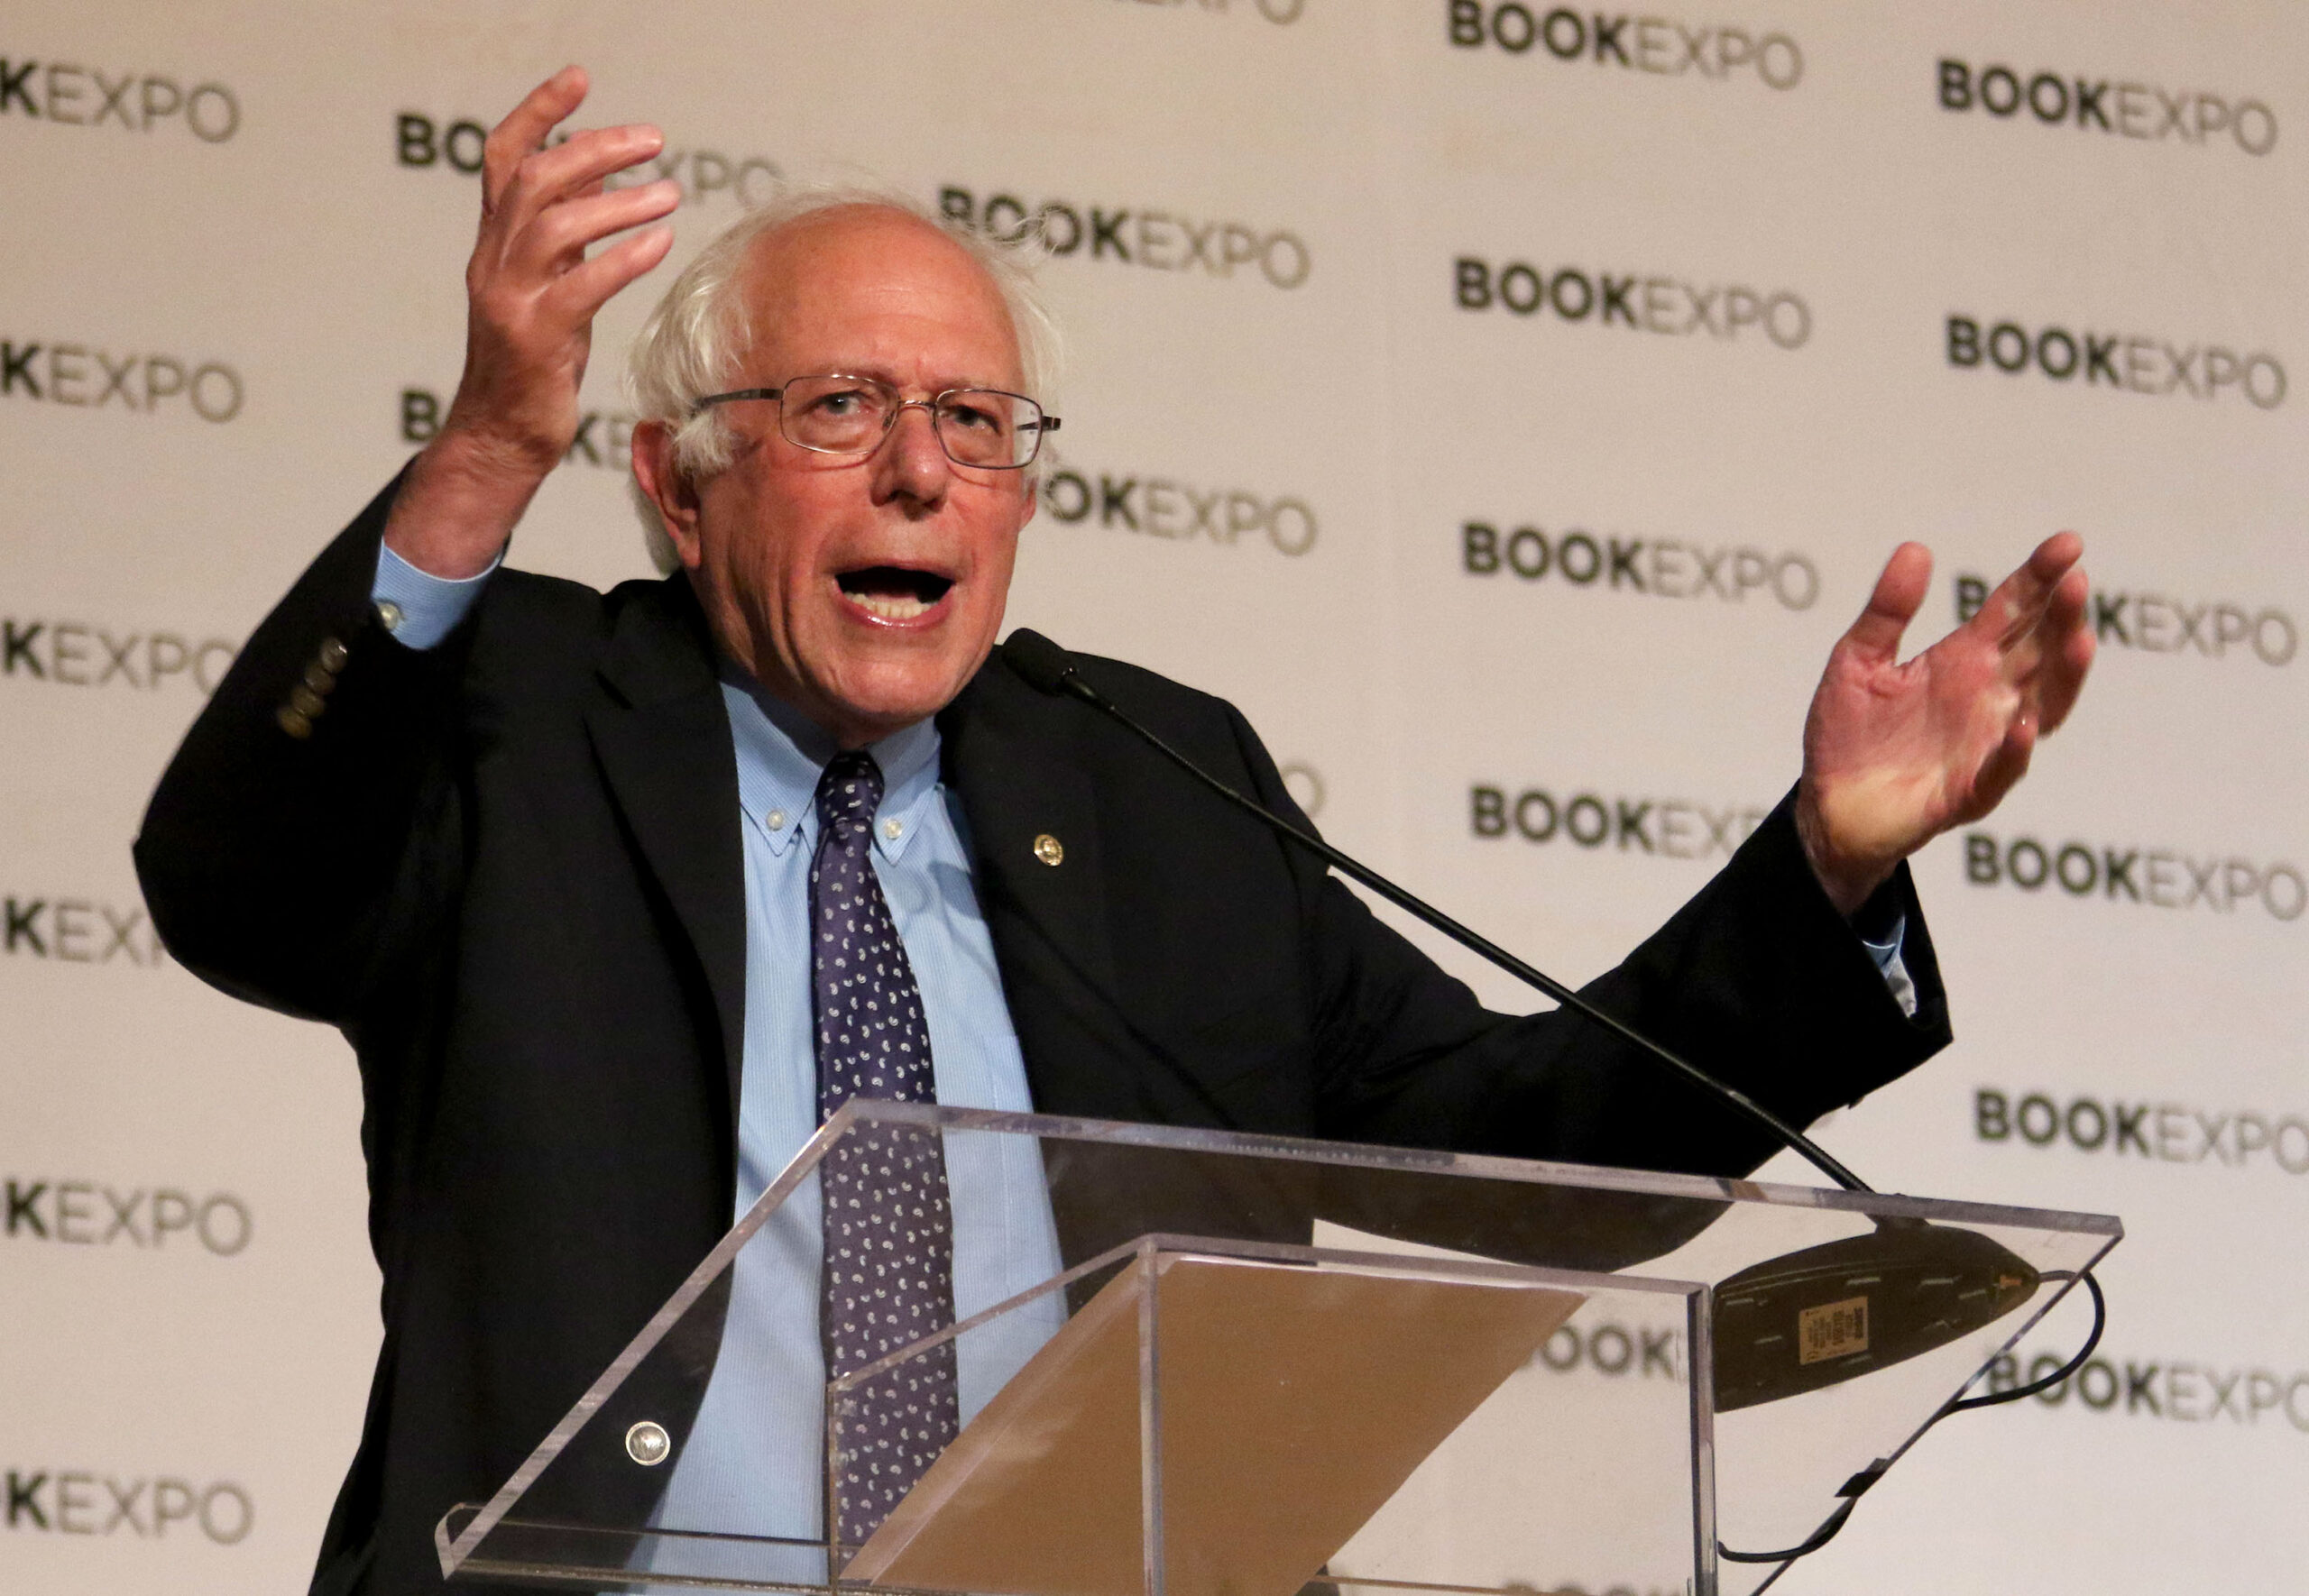 Former Democratic Presidential candidate and Vermont Senator BERNIE SANDERS discusses his upcoming book 'Where Do We Go From Here' at Book Expo 2018 held at the Jacob Javits Center. (Credit Image: © Nancy Kaszerman via ZUMA Wire)